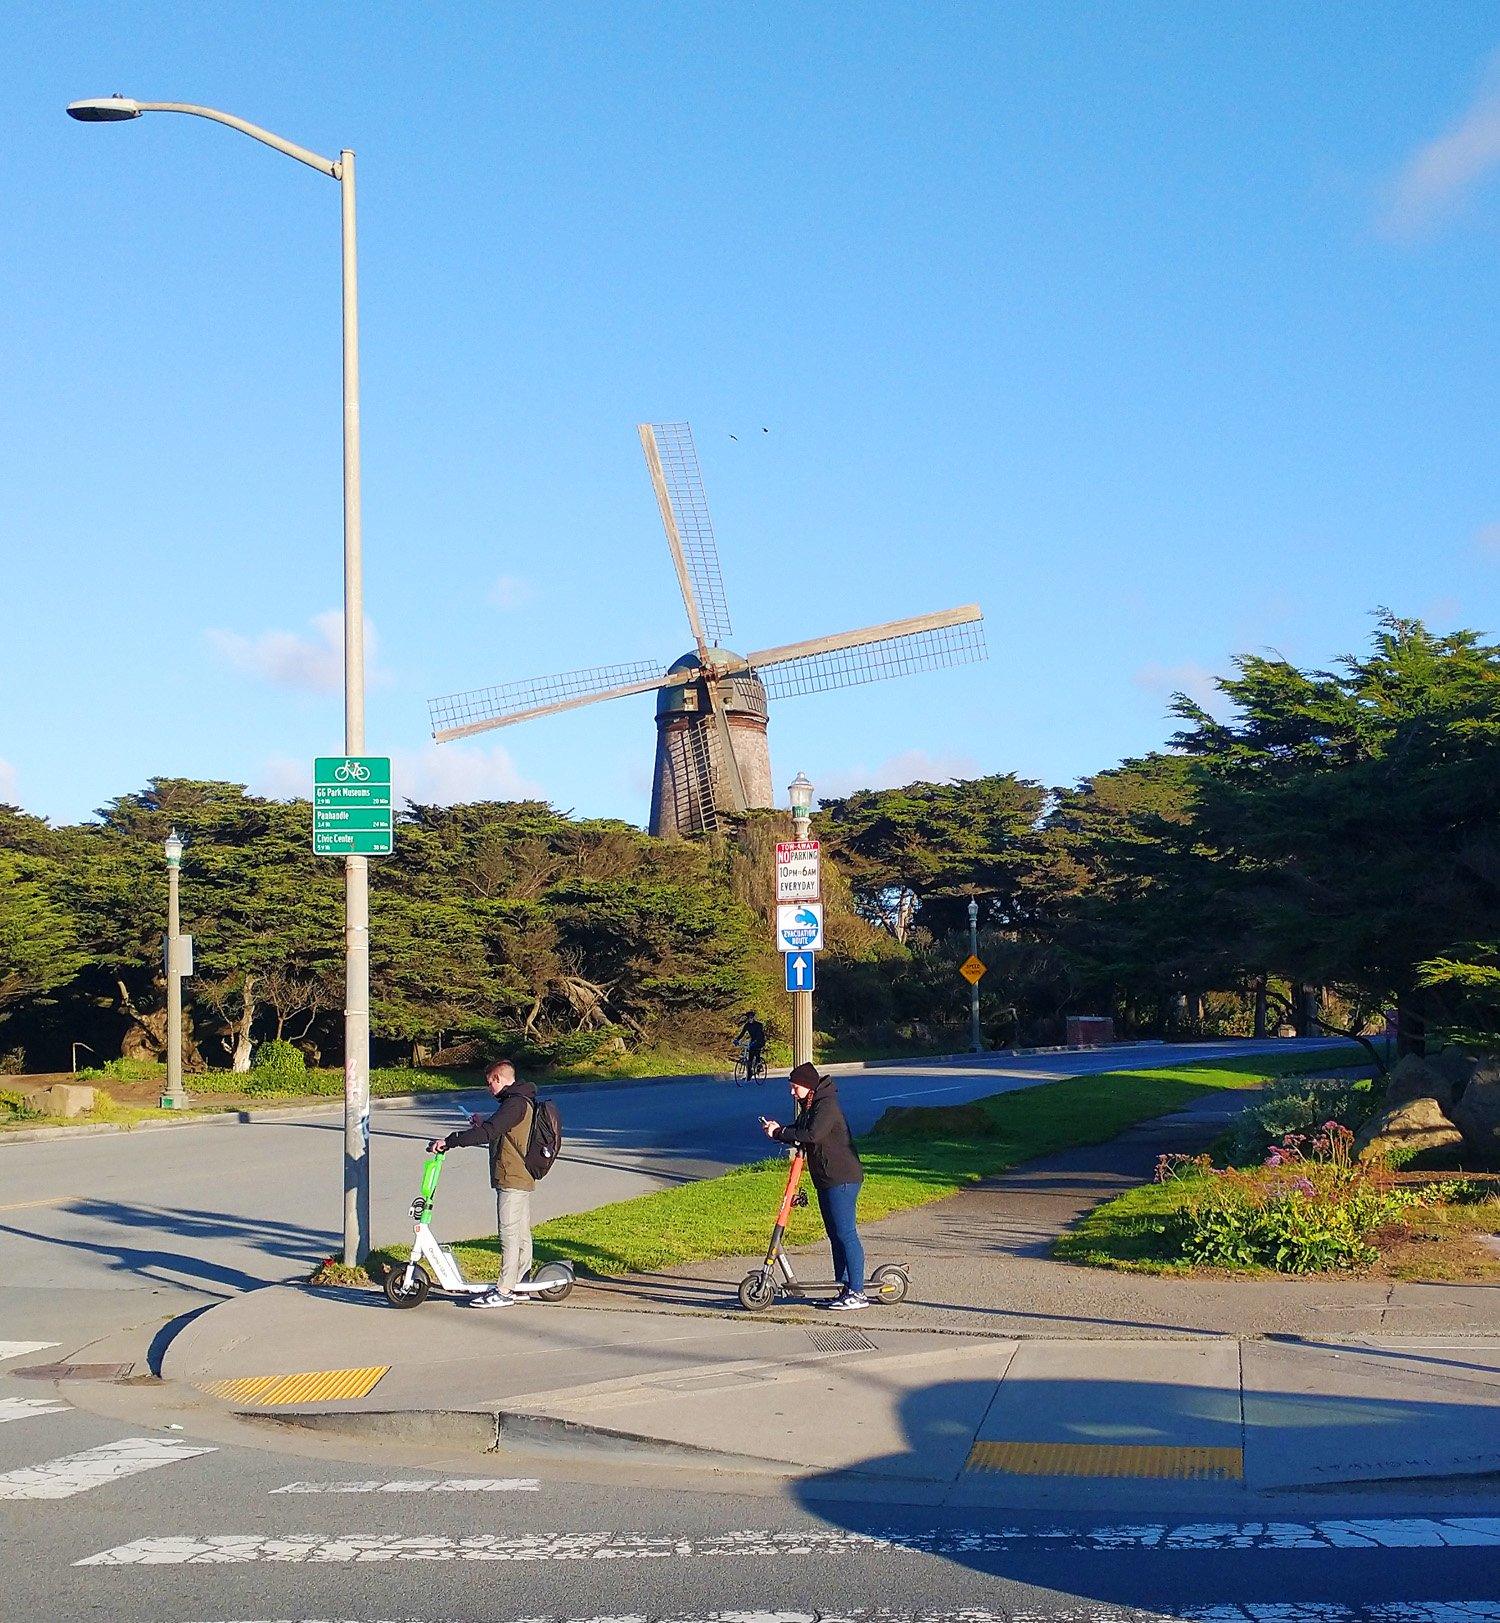 Turning into Golden Gate park to see the world's largest Dutch Windmill.